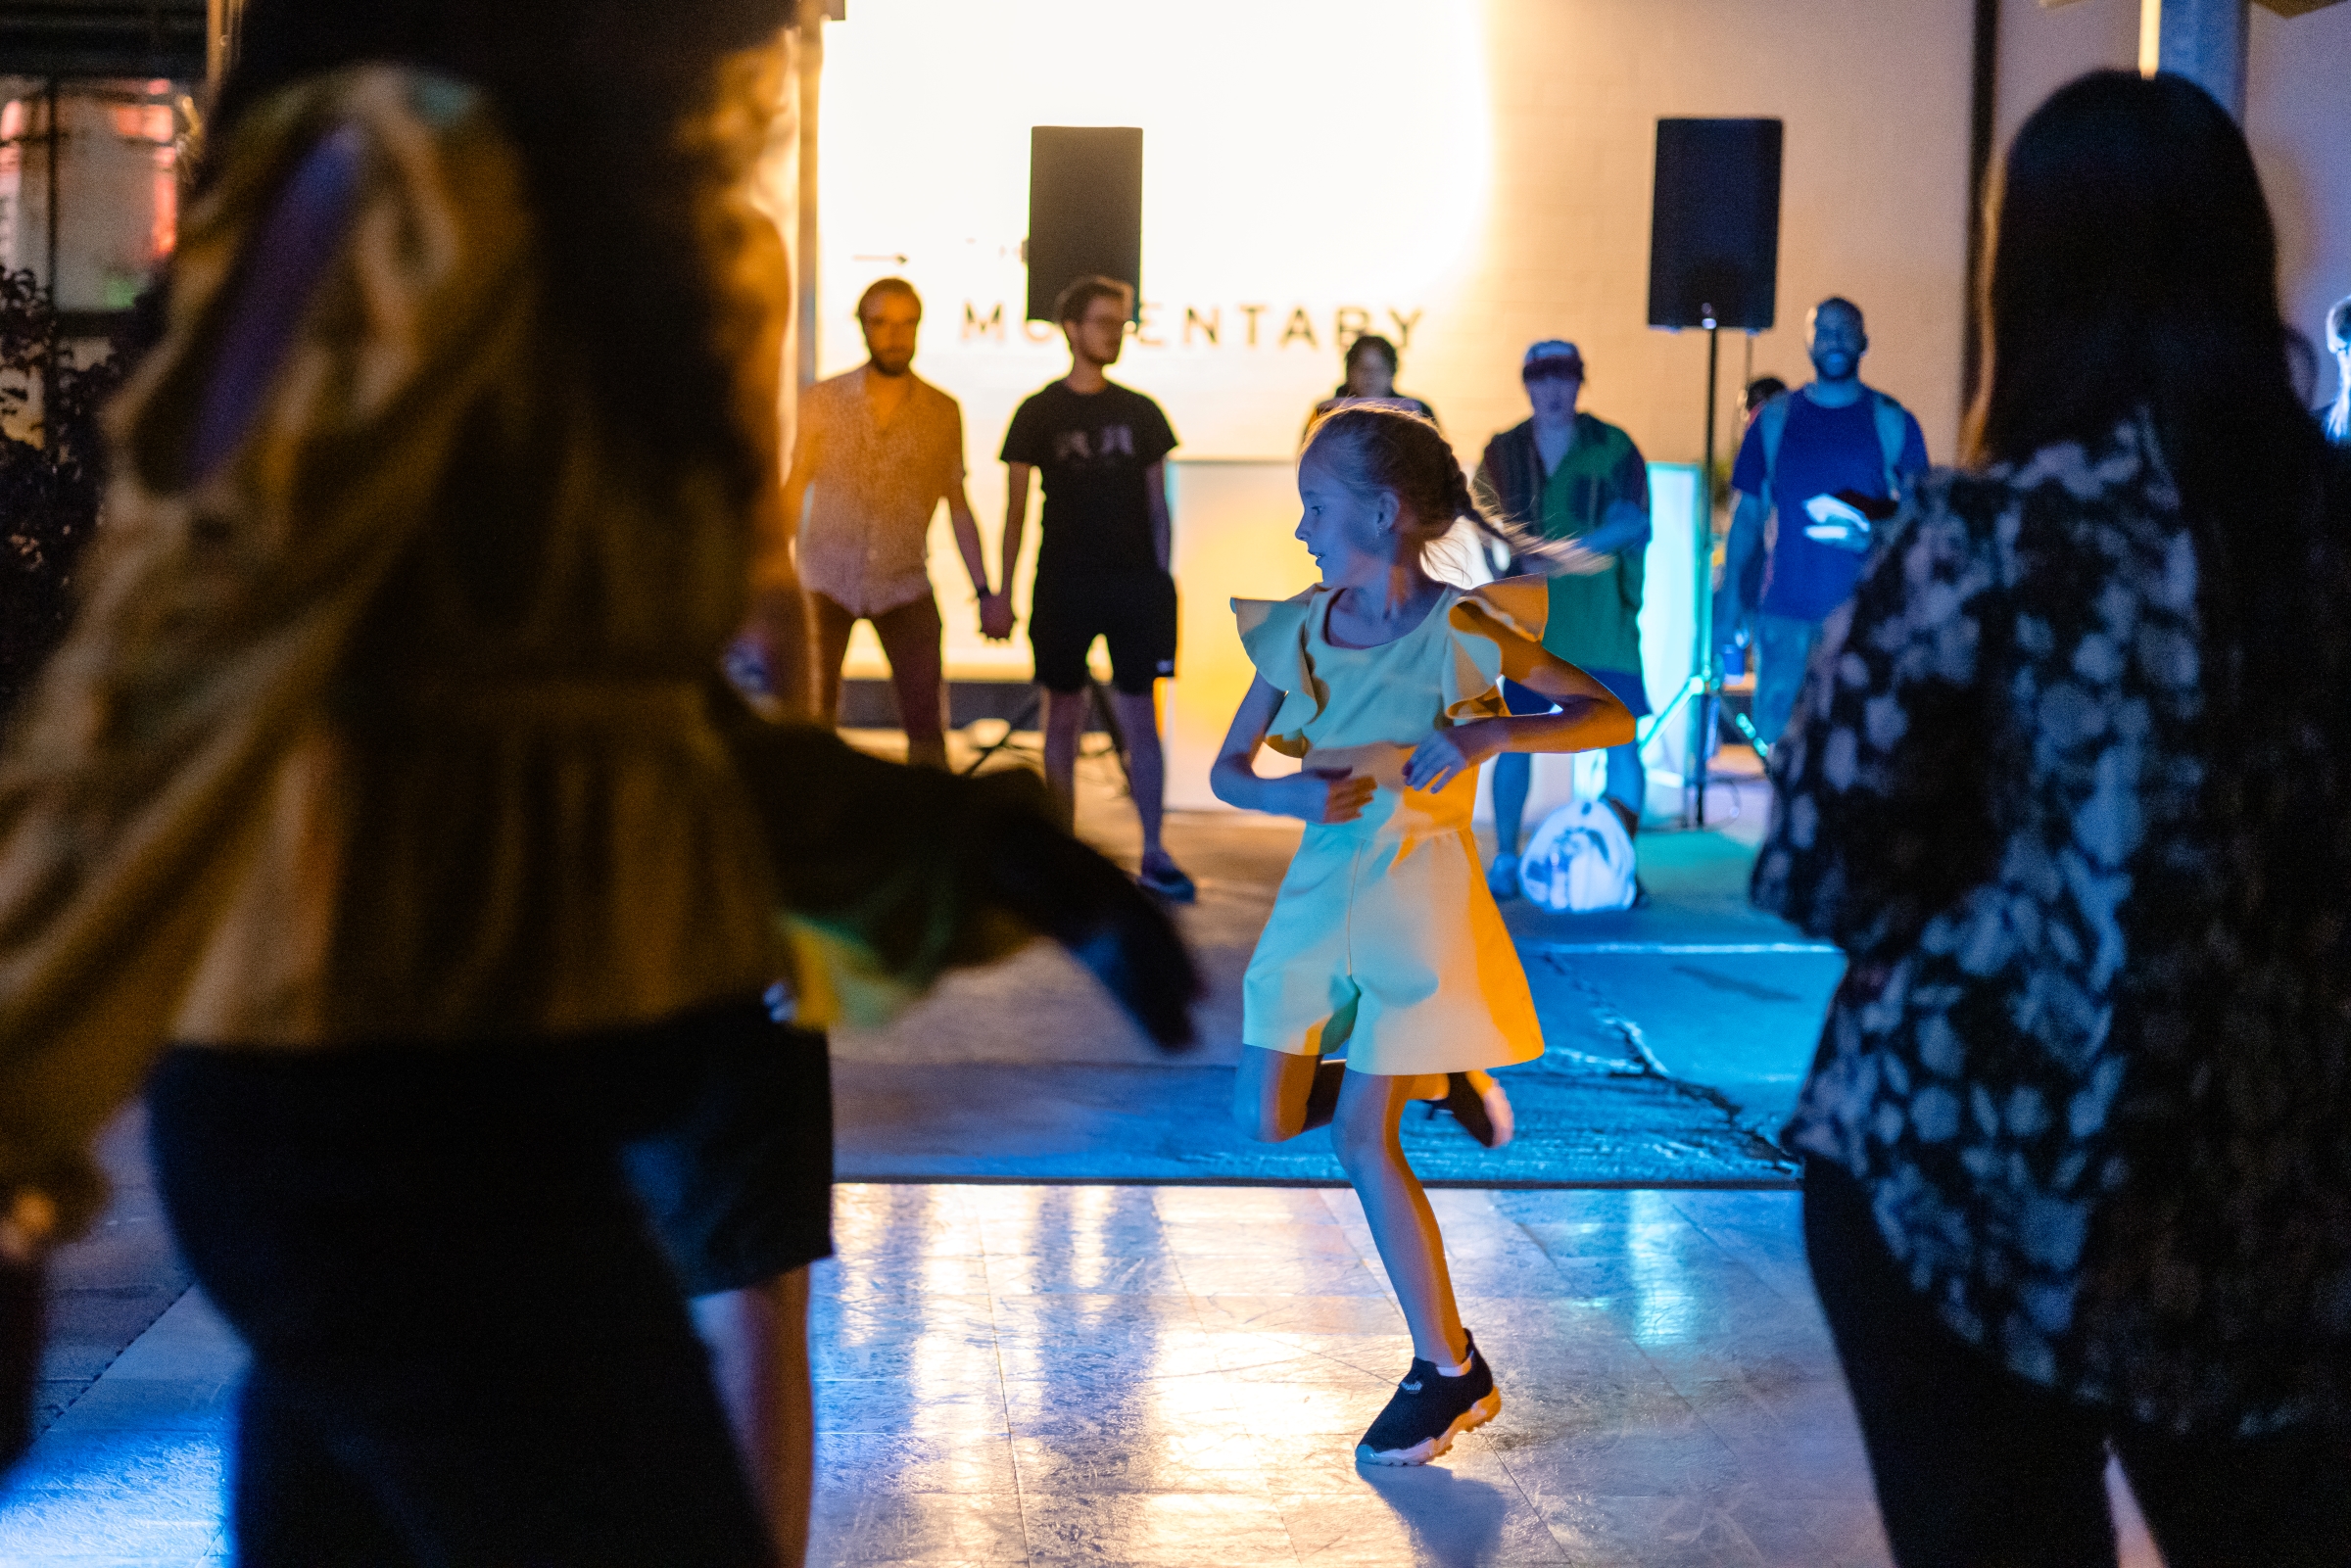 A young girl dances in a dress at an event at the Momentary